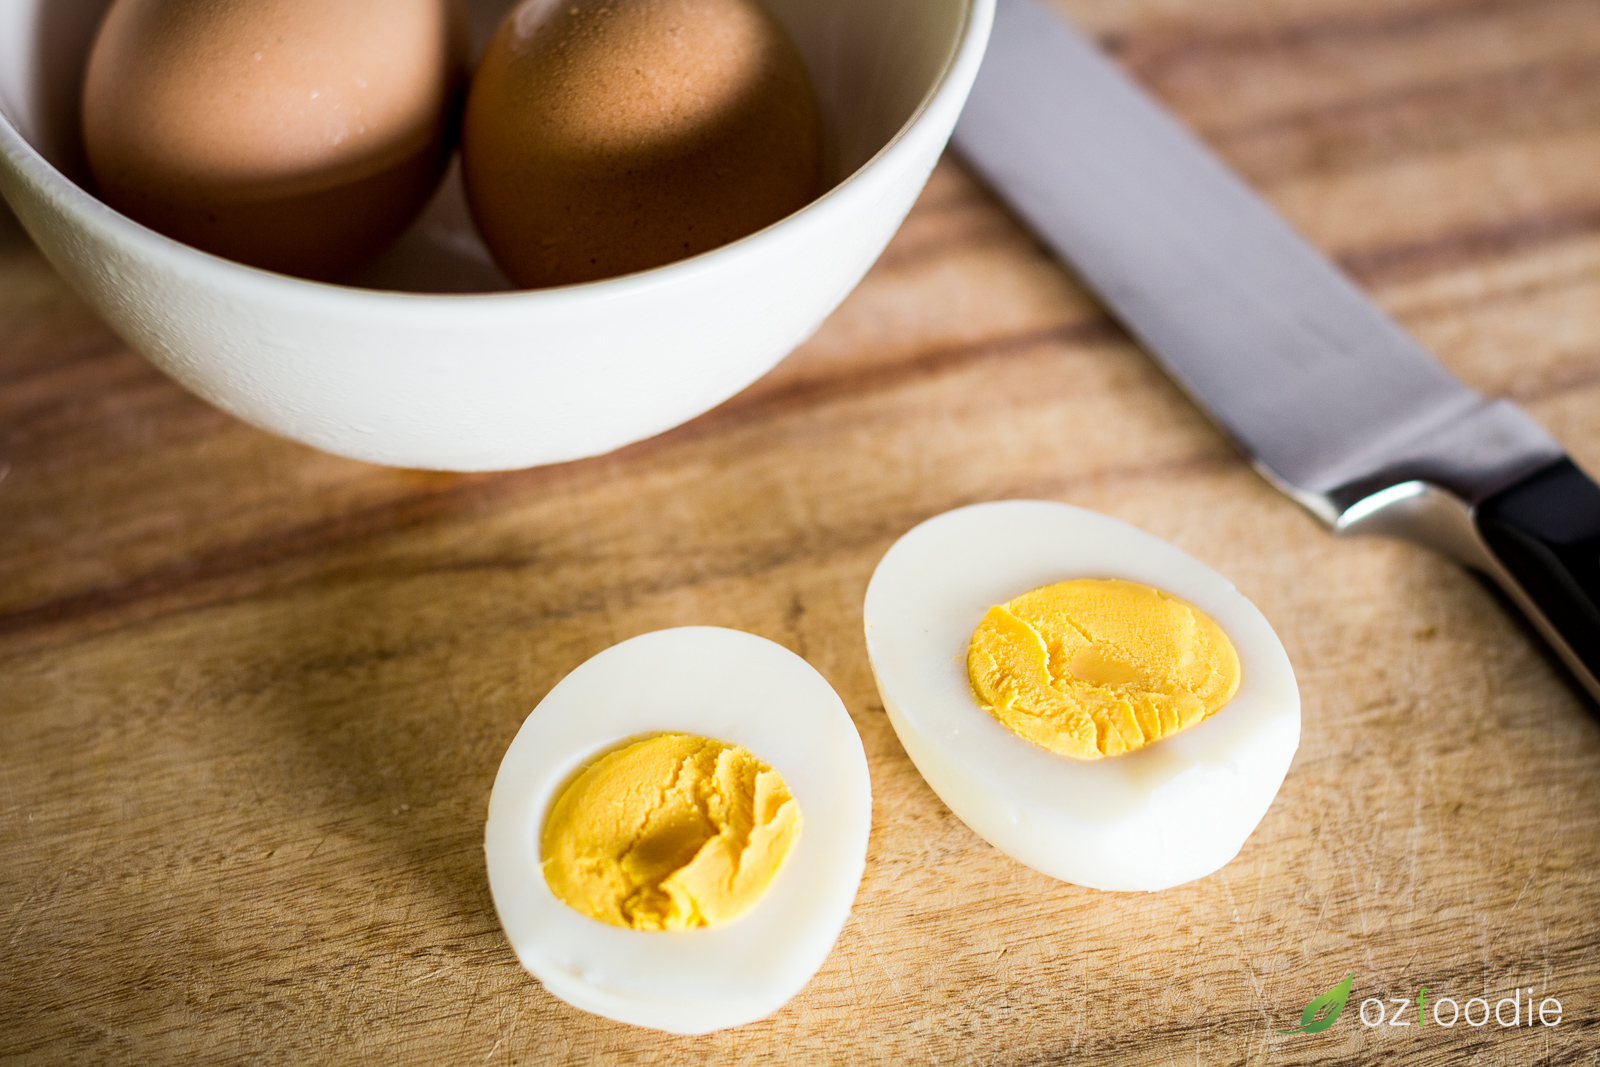 A bowl of hard-boiled eggs with a peeled and halved egg in the foreground.